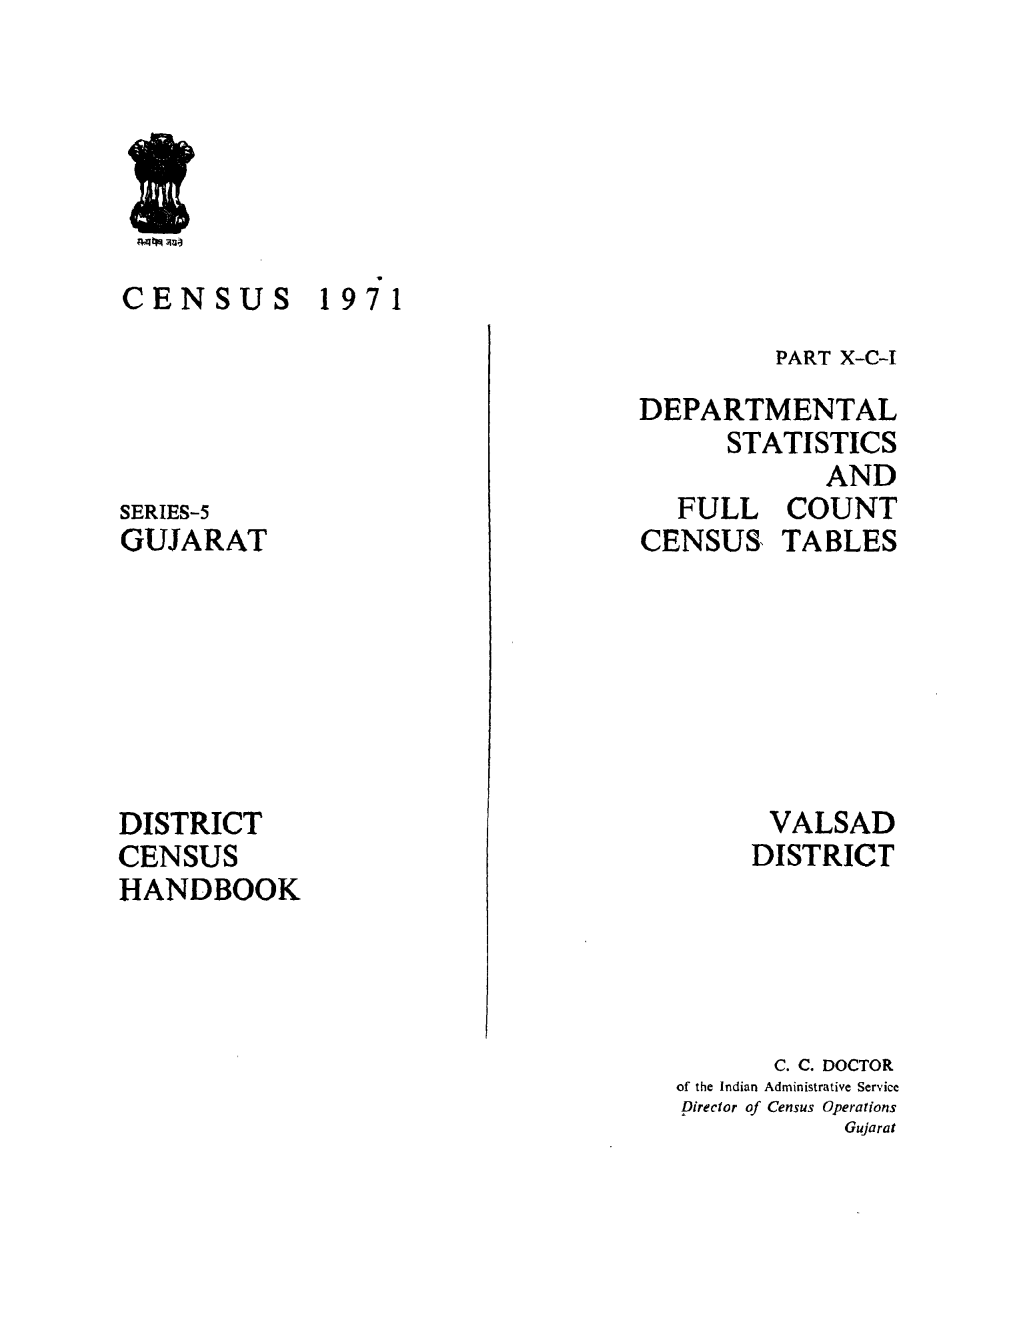 Departmental Statistics and Full Count Census, Tables Valsad District